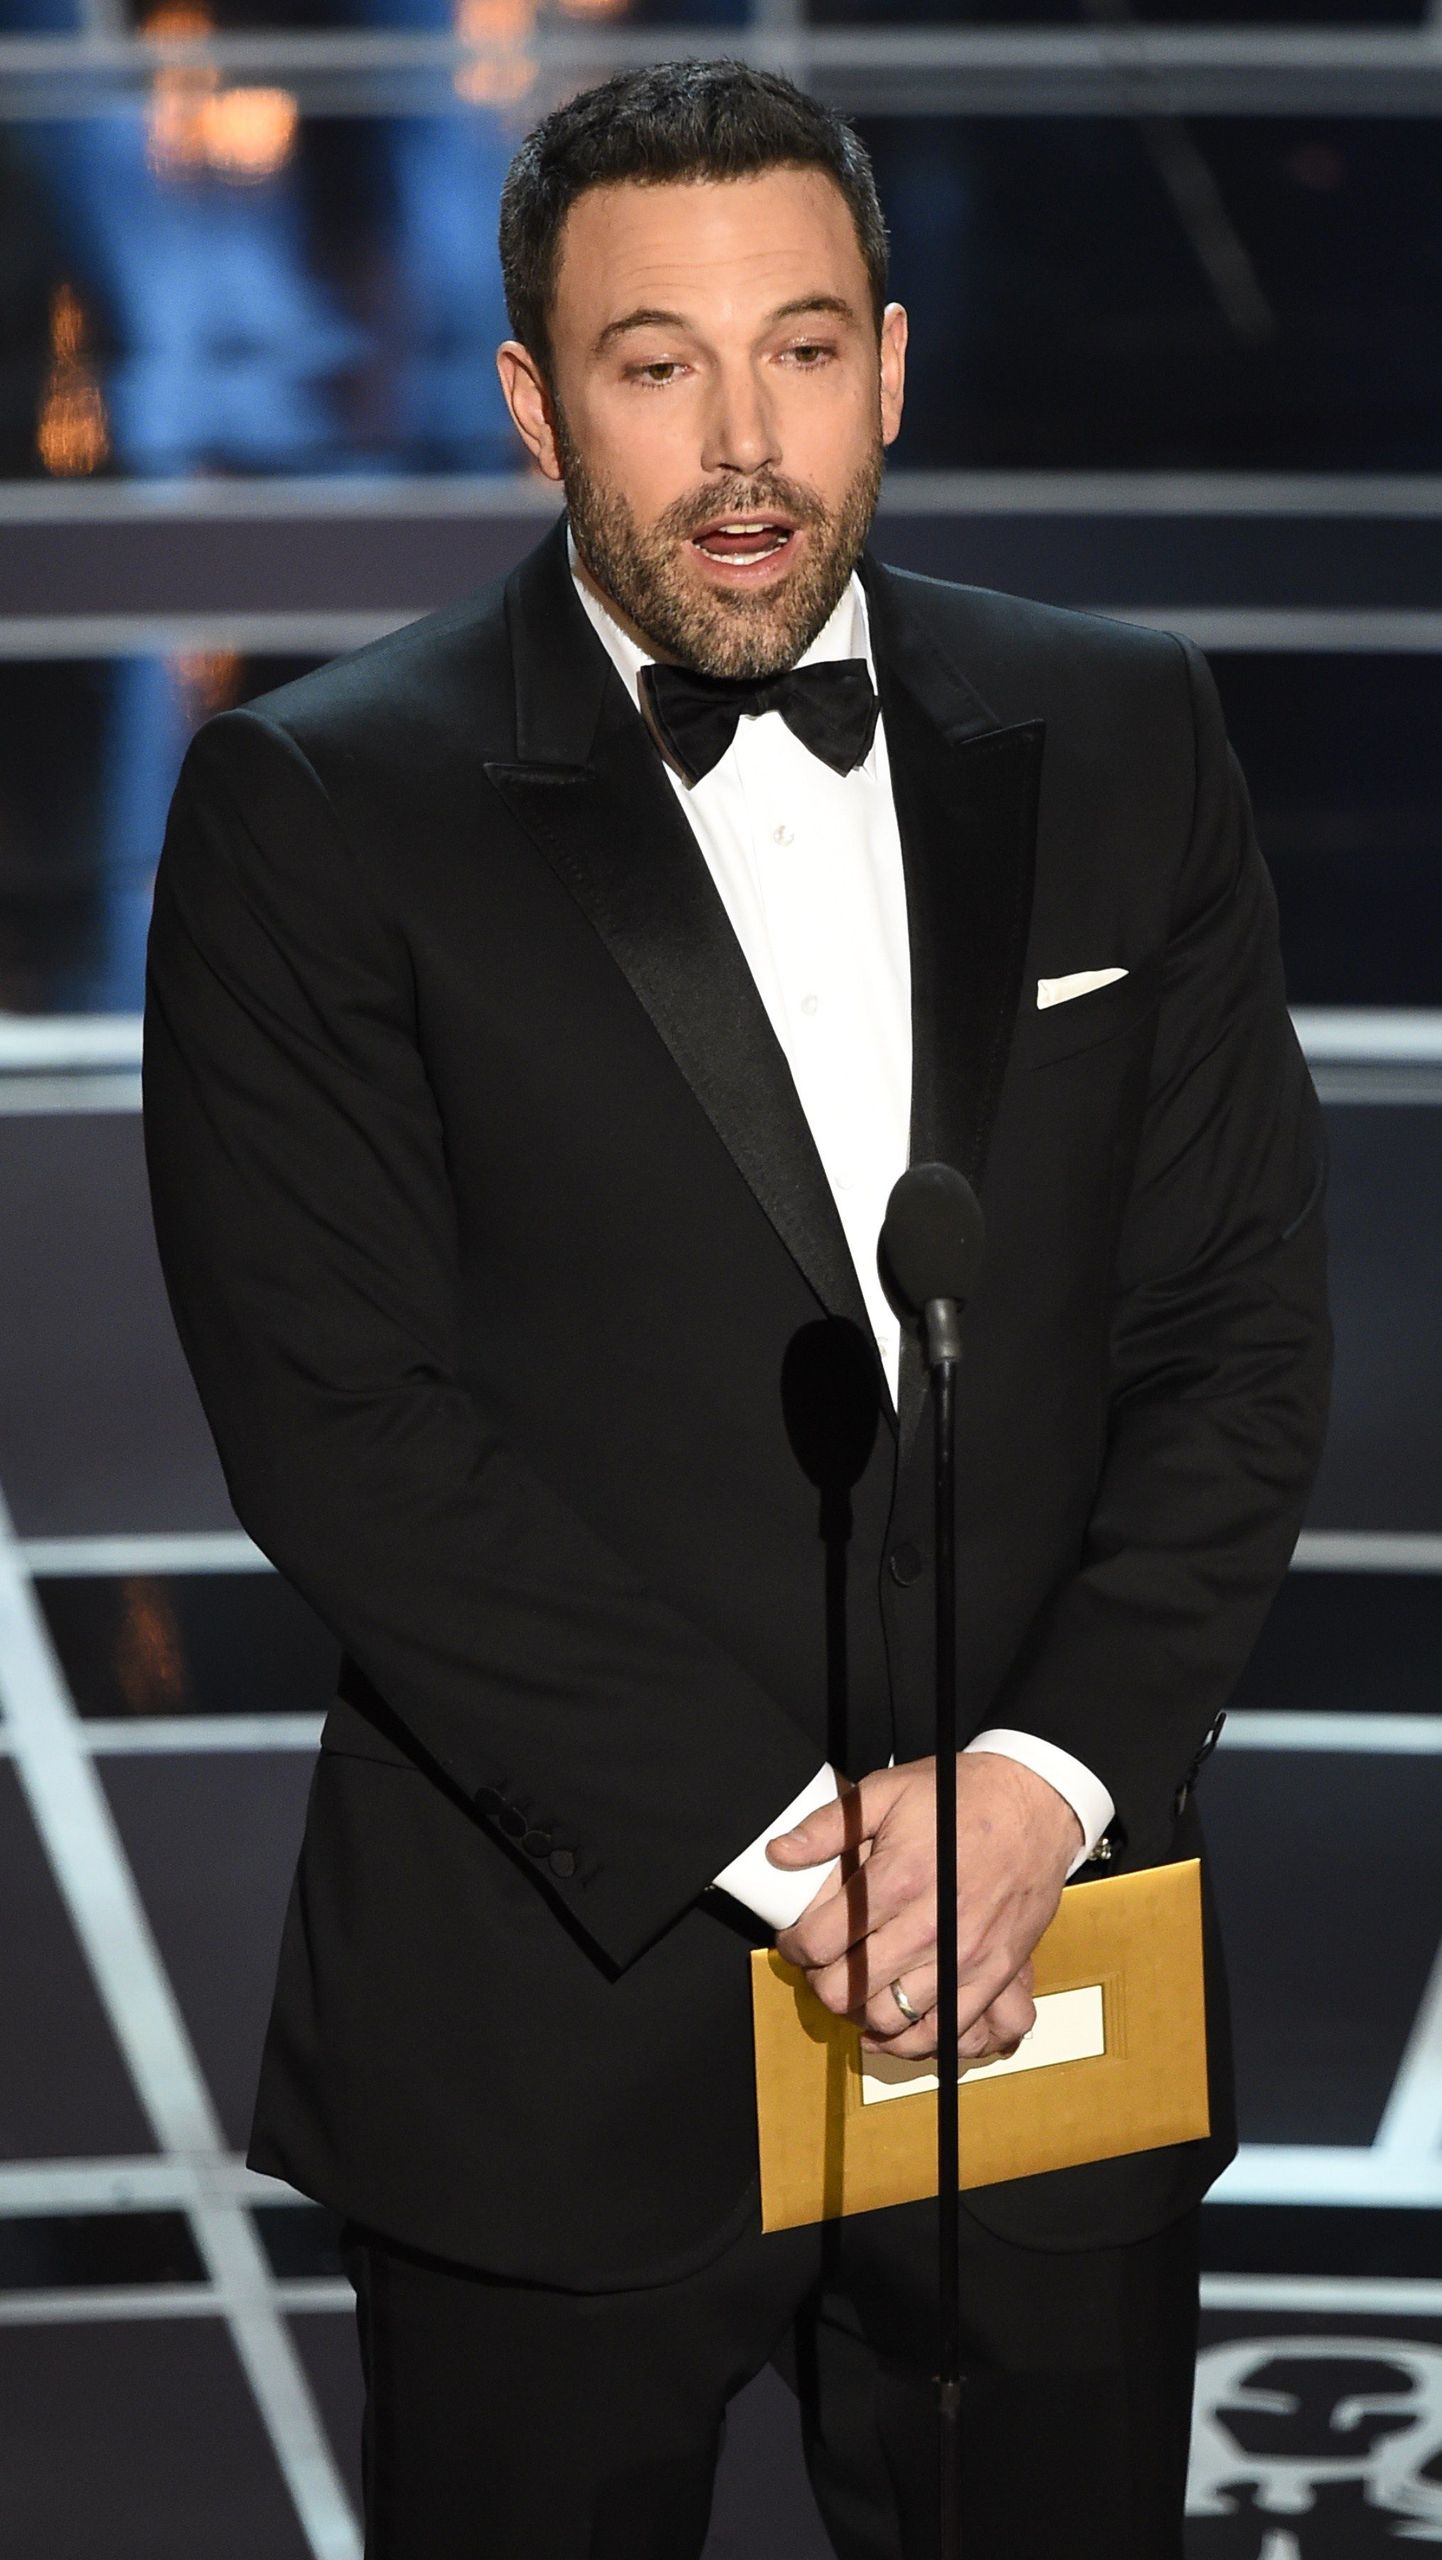 Ben Affleck presents an award on stage at the 87th Oscars February 22, 2015 in Hollywood, California. AFP PHOTO / Robyn BECK